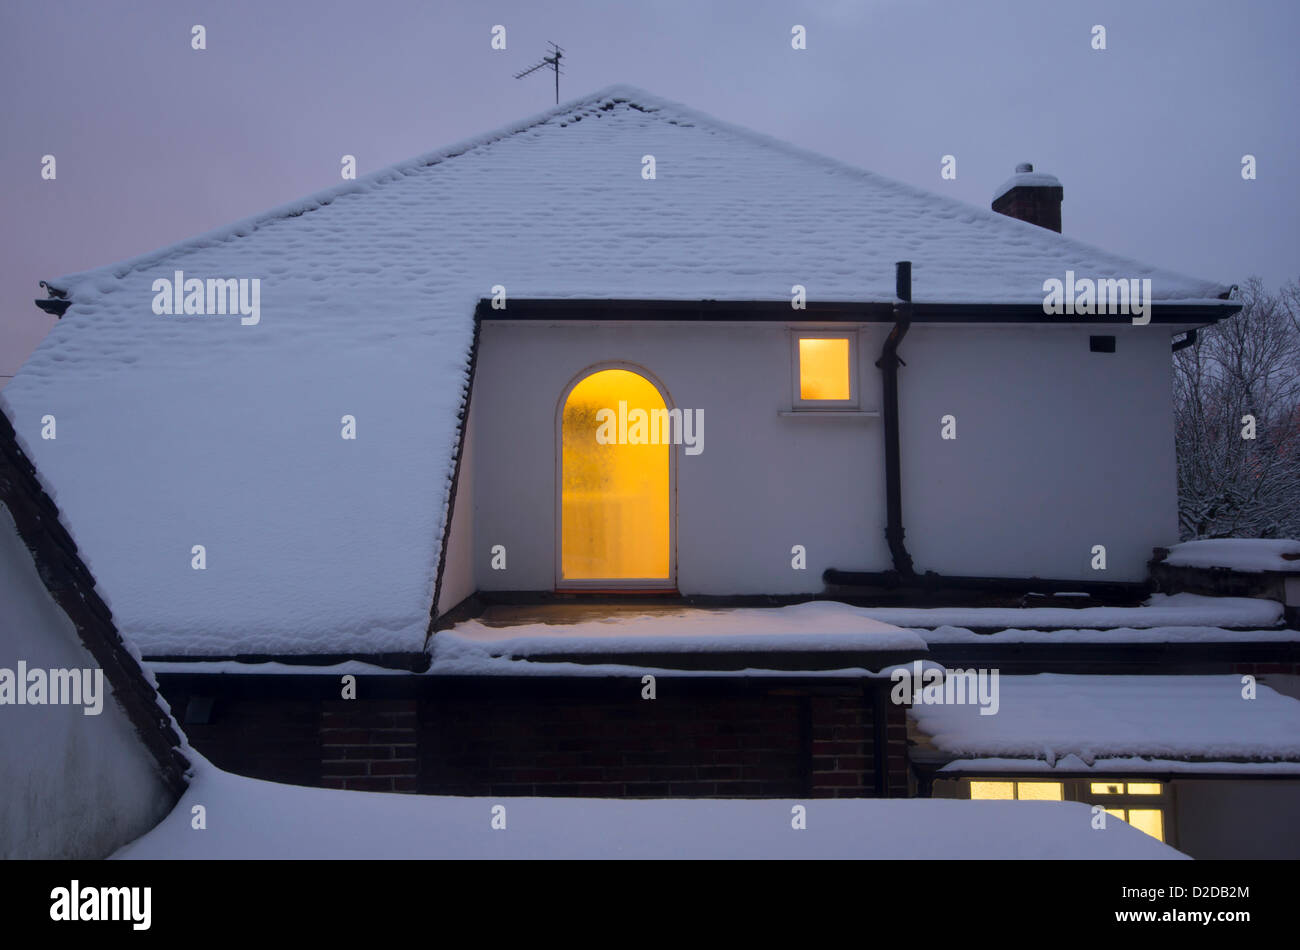 Surrey, UK. 21st January 2013. A house is seen covered in thick snow at dawn Stock Photo